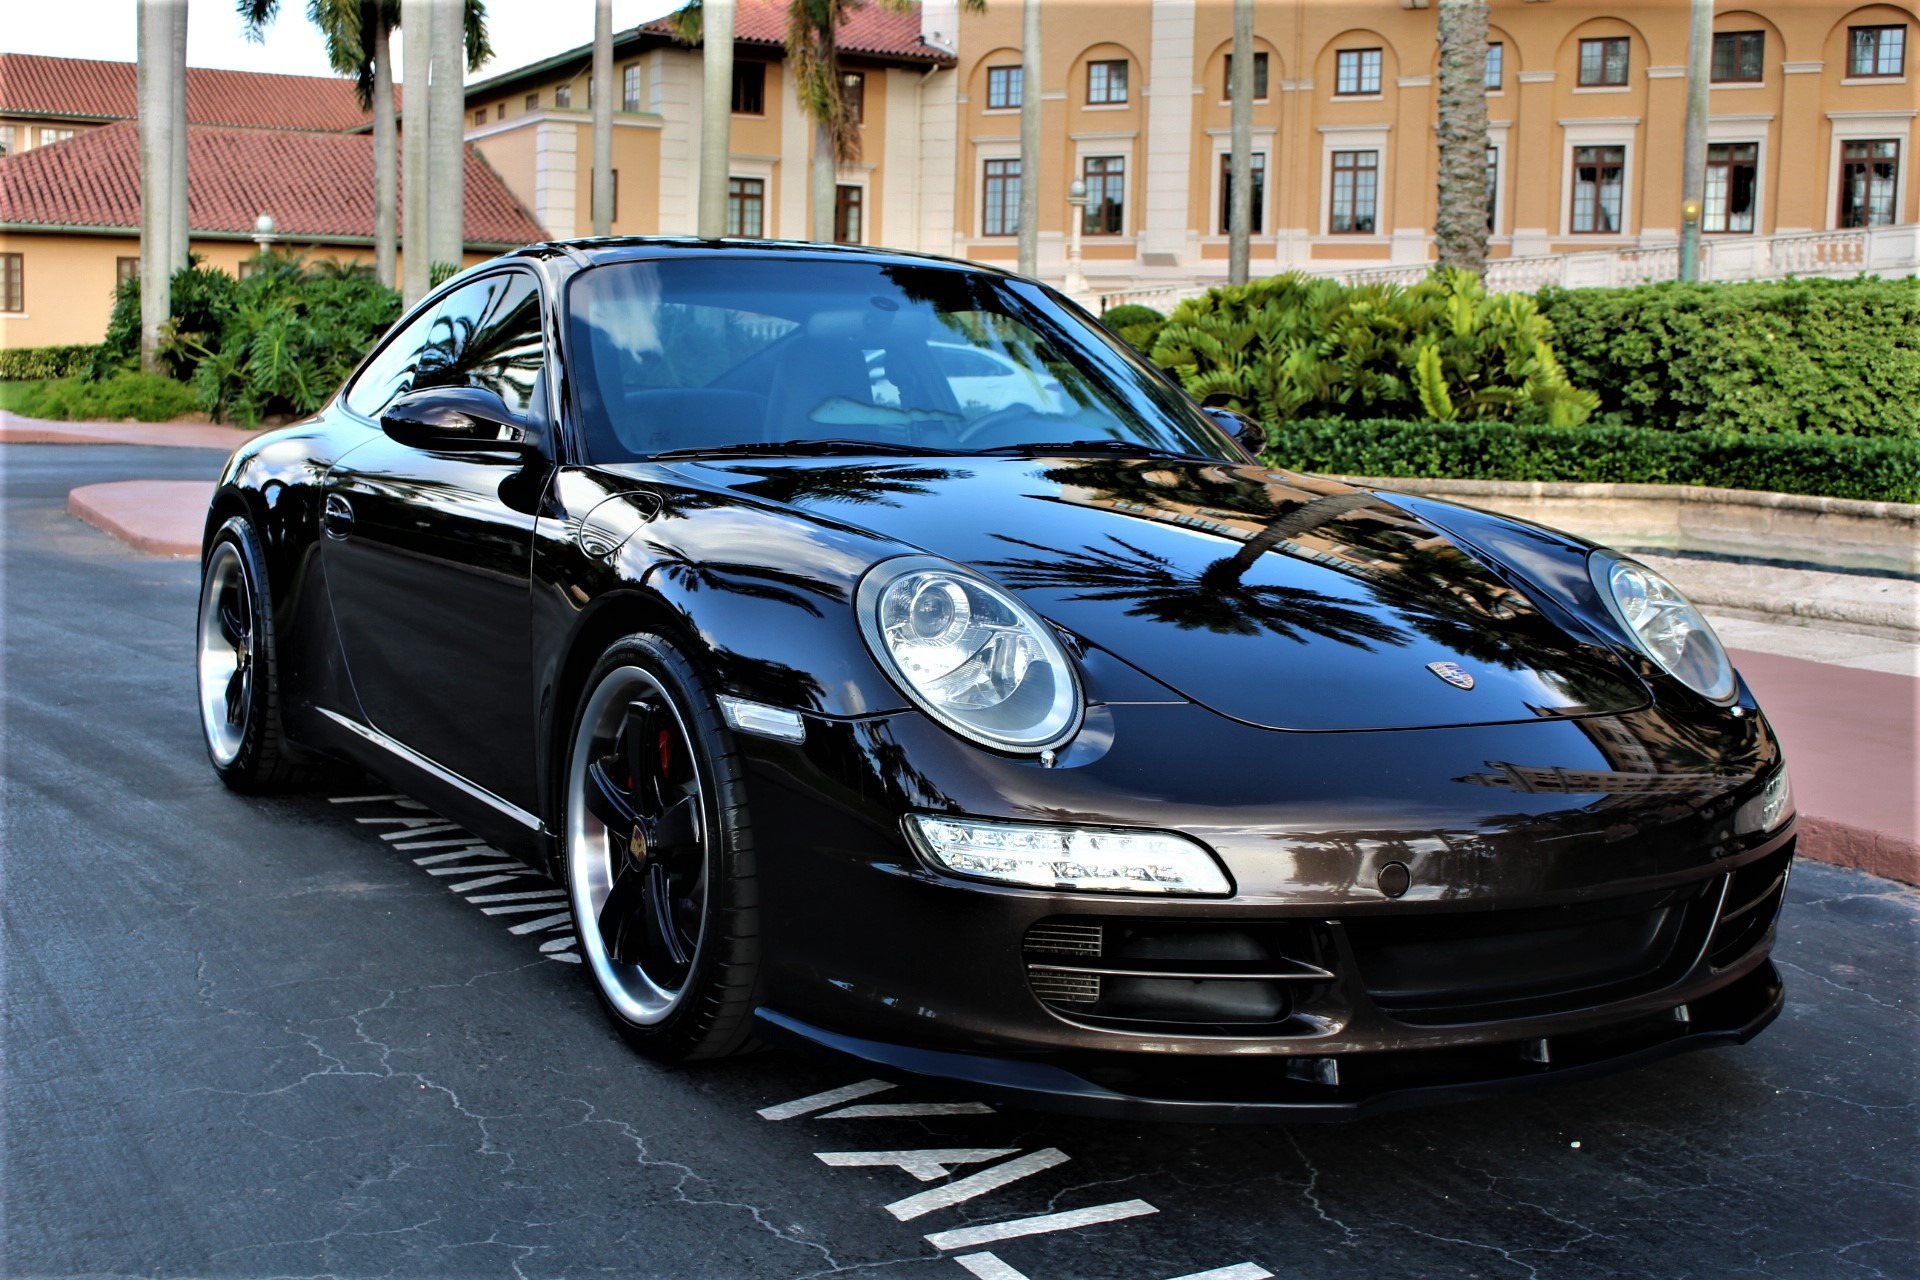 Used 2008 Porsche 911 Carrera S for sale Sold at The Gables Sports Cars in Miami FL 33146 3